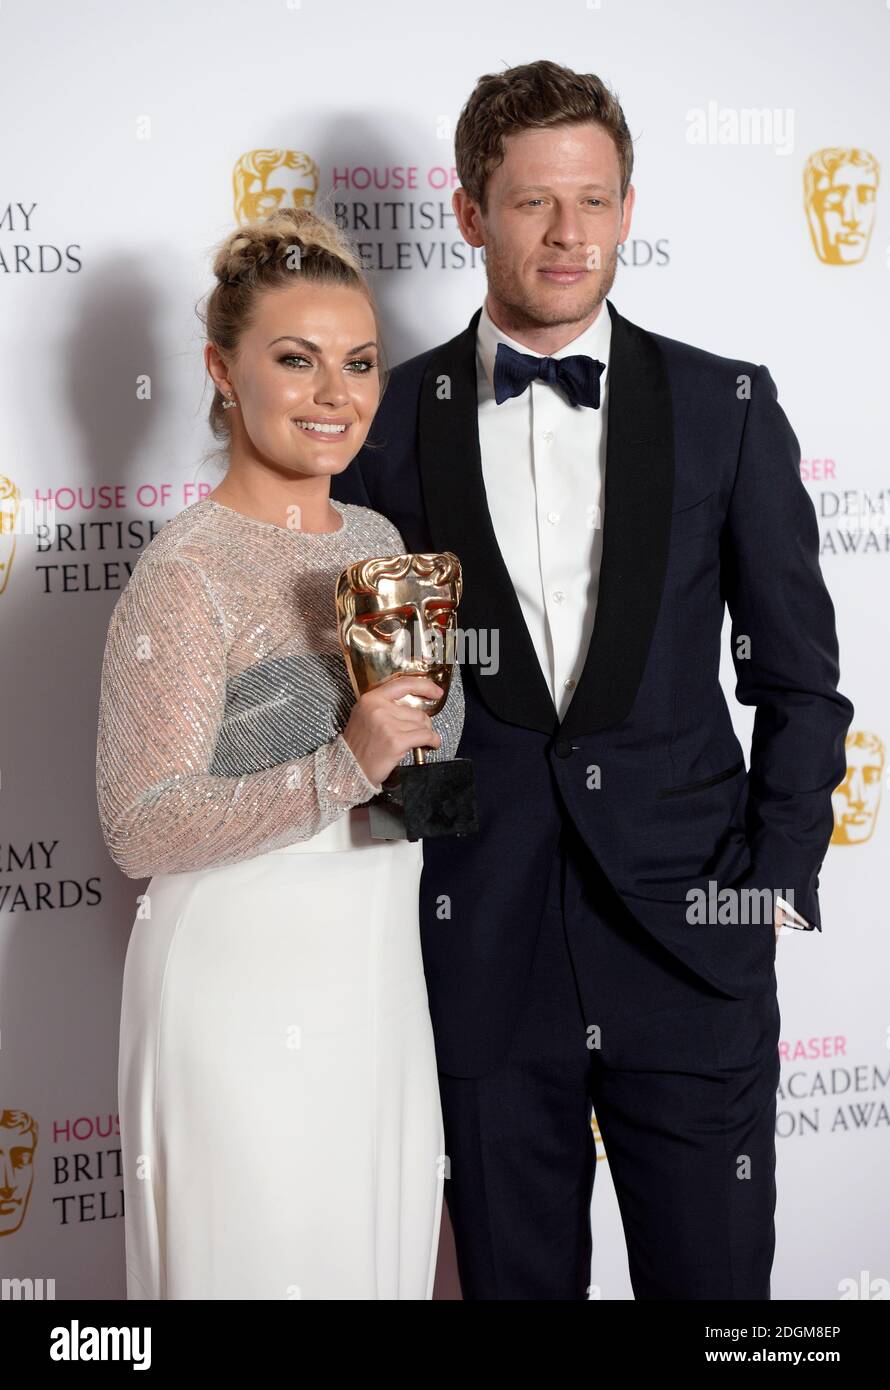 Chanel Cresswell with the Best Supporting Actress award for This Is England '90 alongside James Norton in the press room the House of Fraser BAFTA TV Awards 2016 at the Royal Festival Hall, Southbank, London. Stock Photo